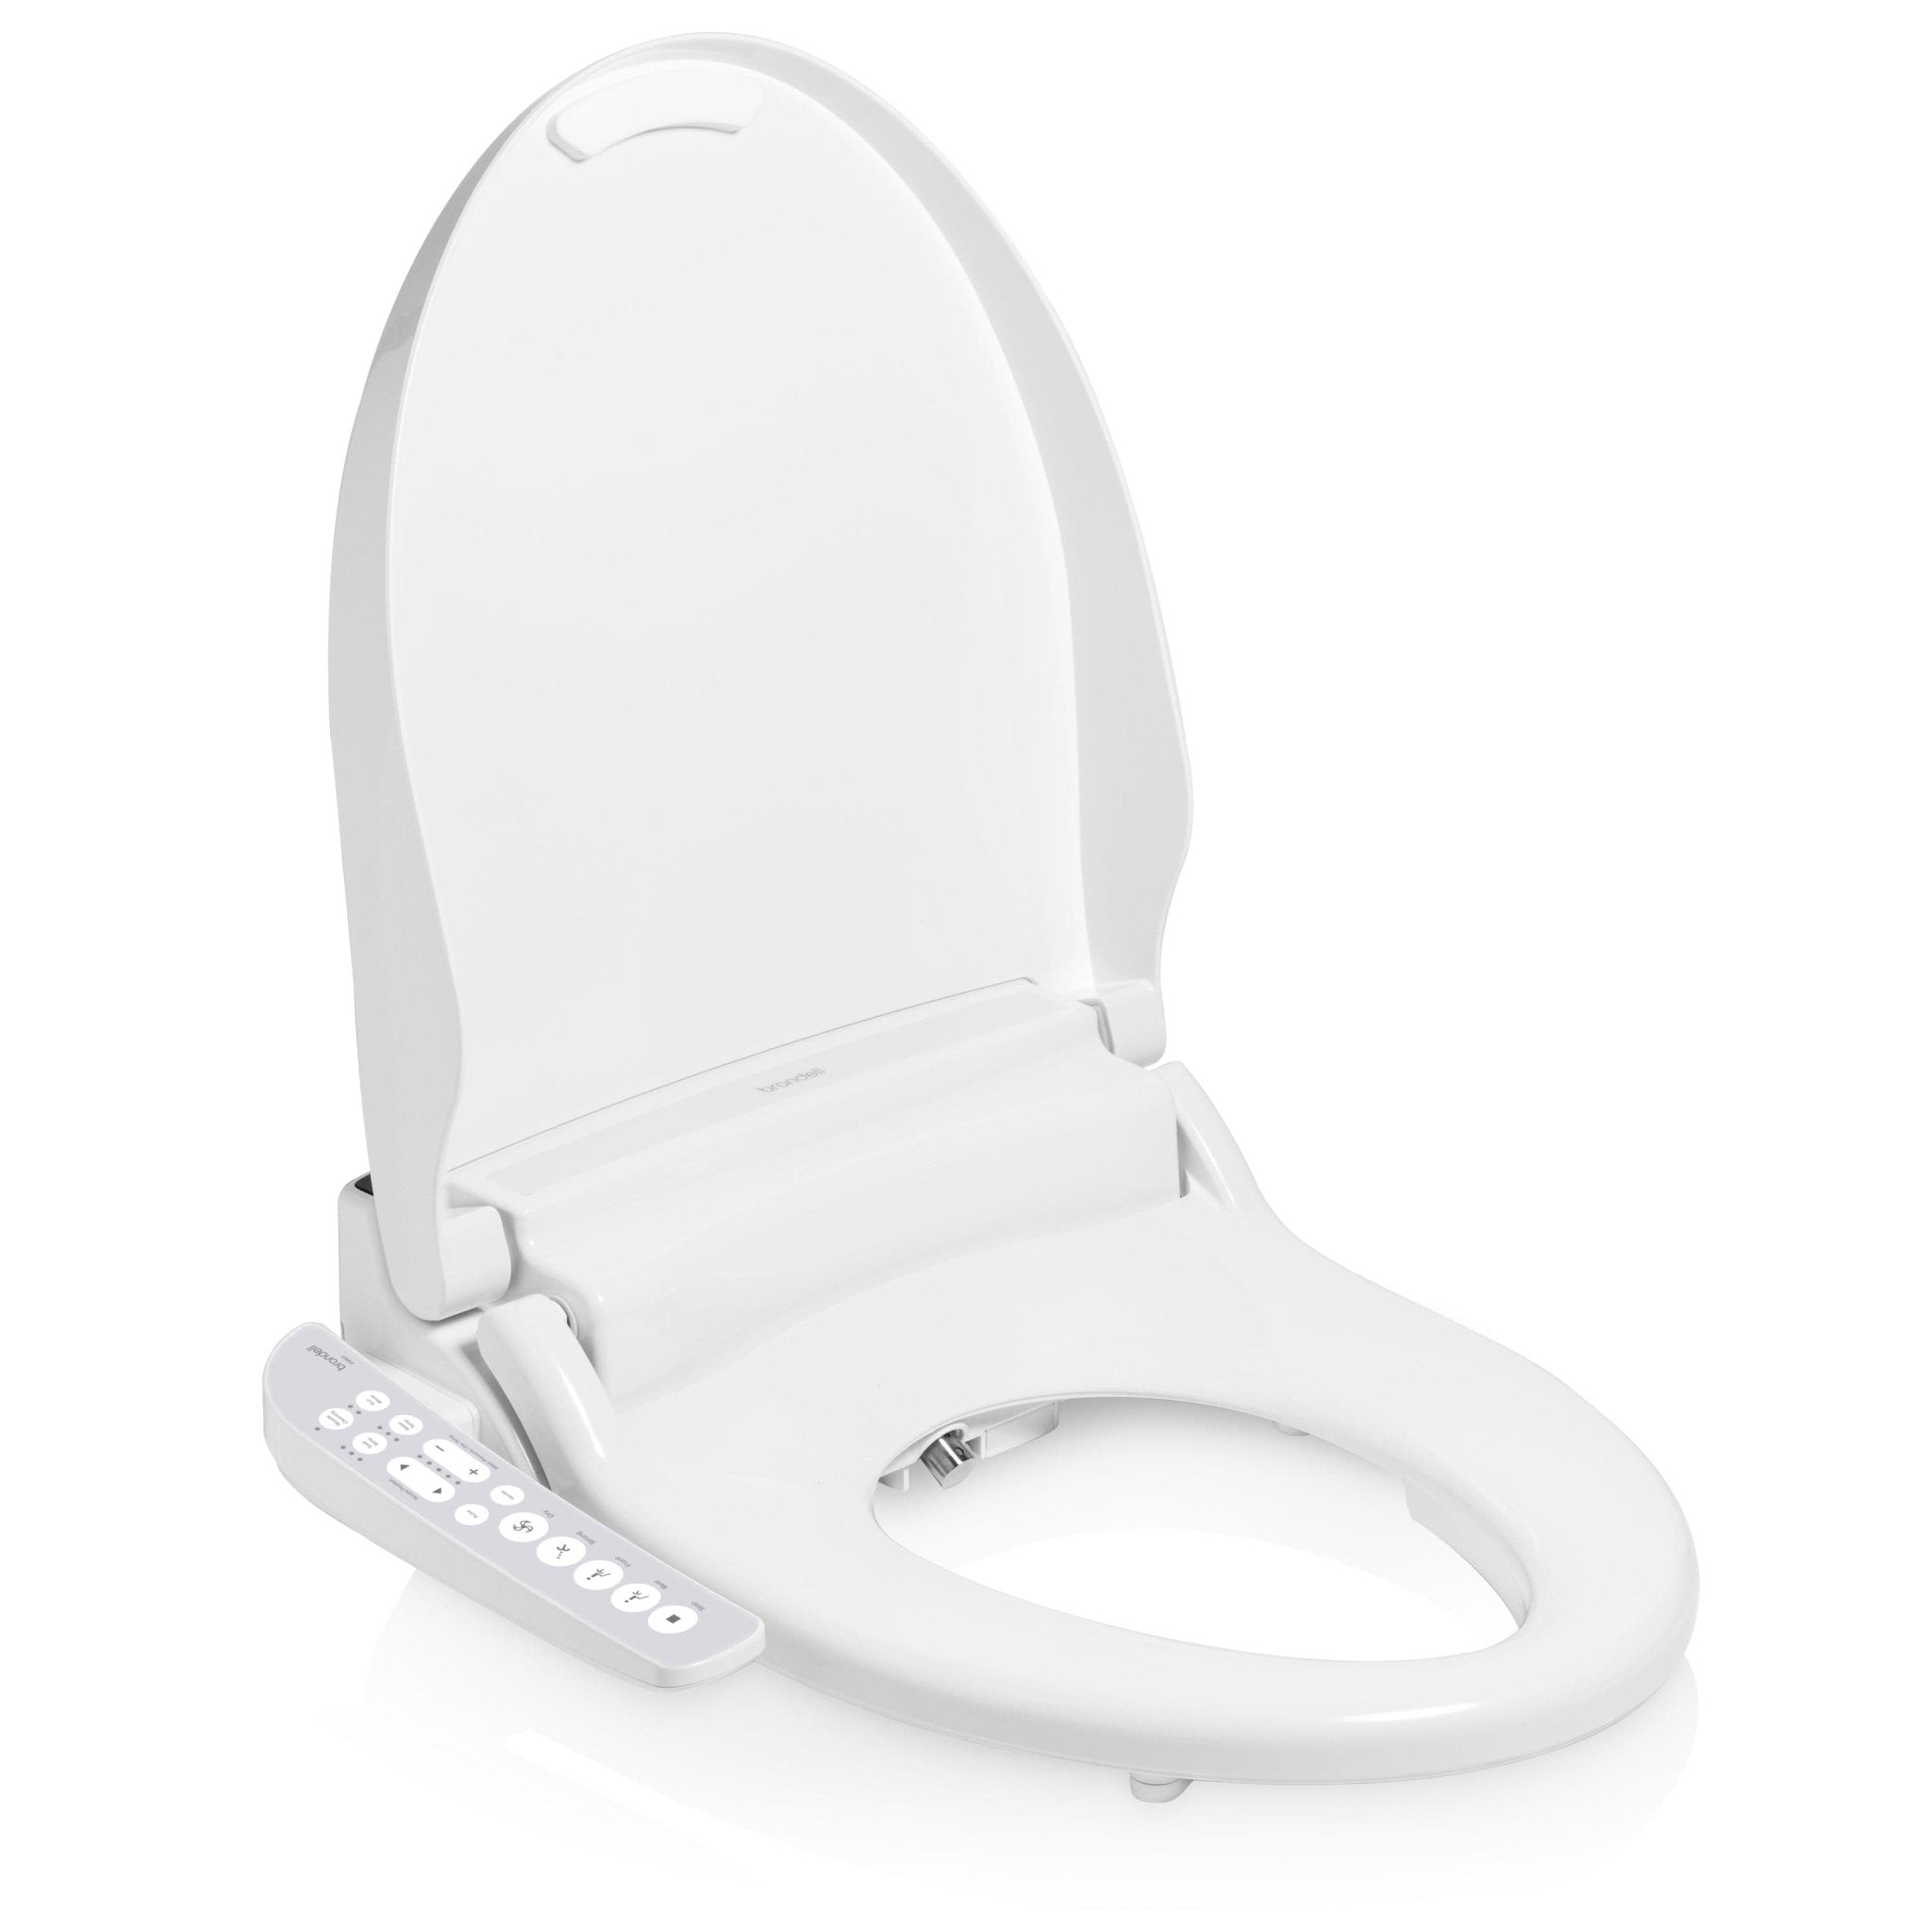 Swash Select DR801 Sidearm Bidet Heated Seat with Warm Air Dryer and Deodorizer, Elongated White DR801-EW -Molaix - Molaix819911015078SWASH SELECT BIDET SEATSDR801-EW